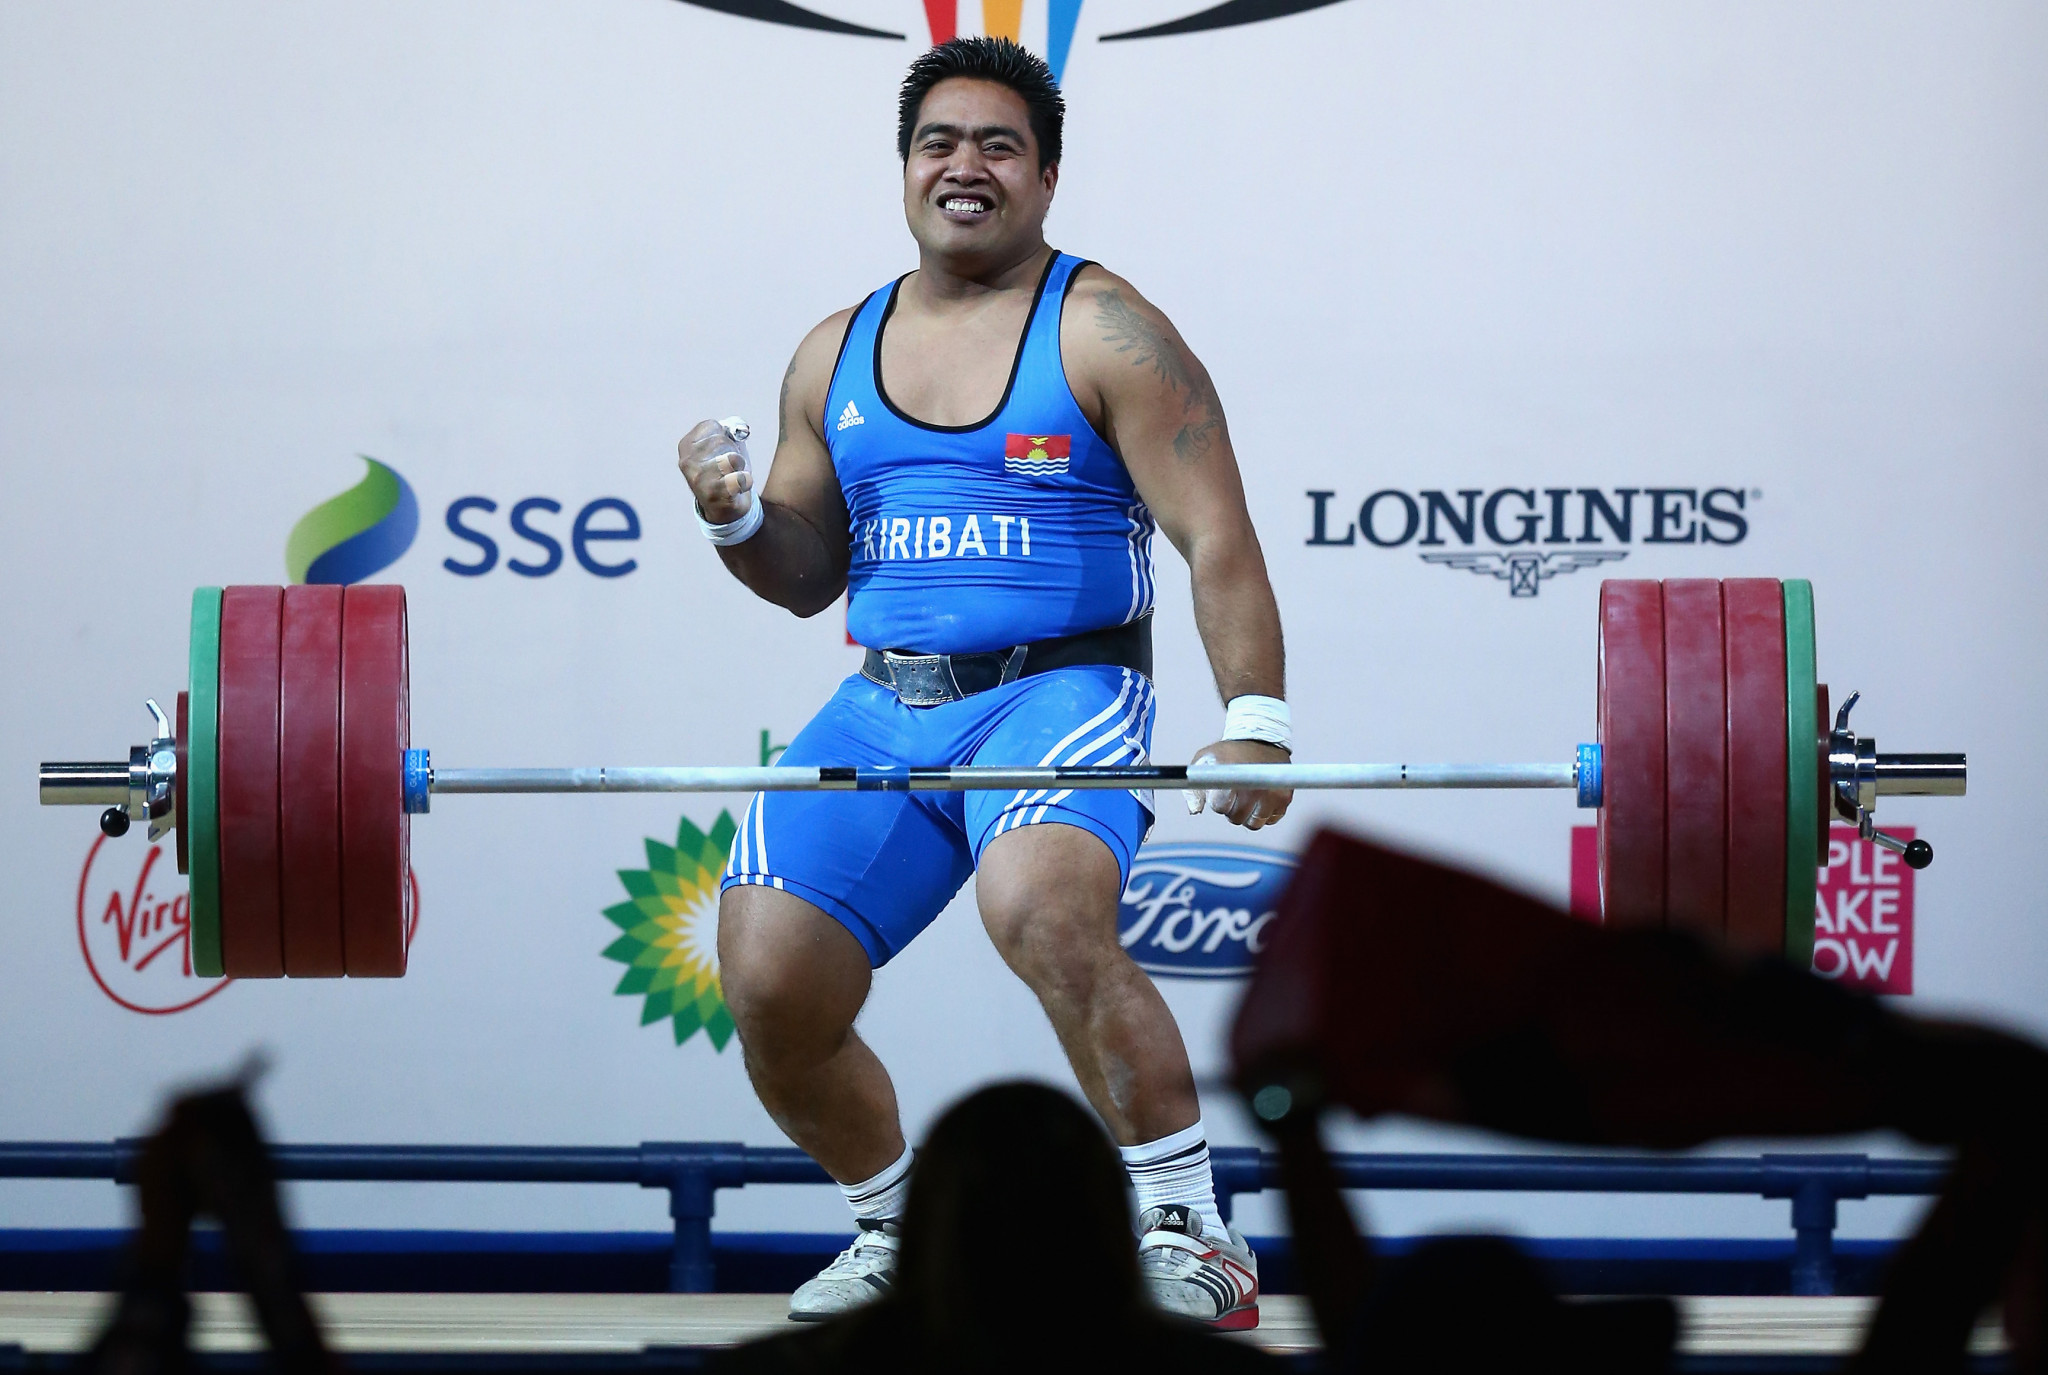 Weightlifting looks to be Oceania's likeliest chance of multiple medals at Gold Coast 2018 ©Getty Images